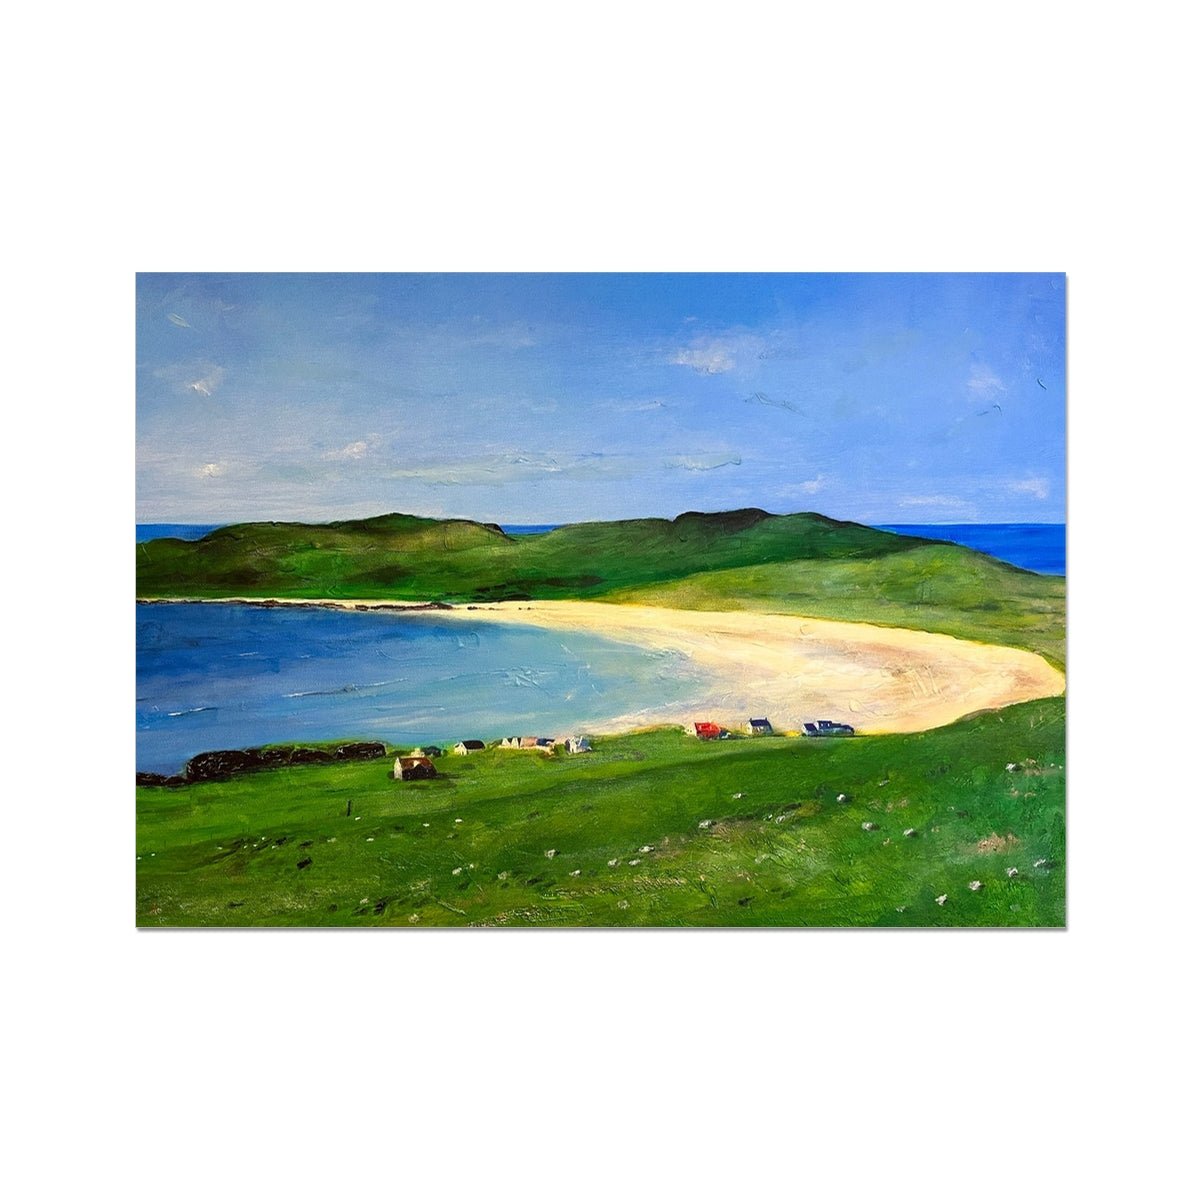 Balephuil Beach Tiree Painting | Fine Art Prints From Scotland-Unframed Prints-Hebridean Islands Art Gallery-A2 Landscape-Paintings, Prints, Homeware, Art Gifts From Scotland By Scottish Artist Kevin Hunter